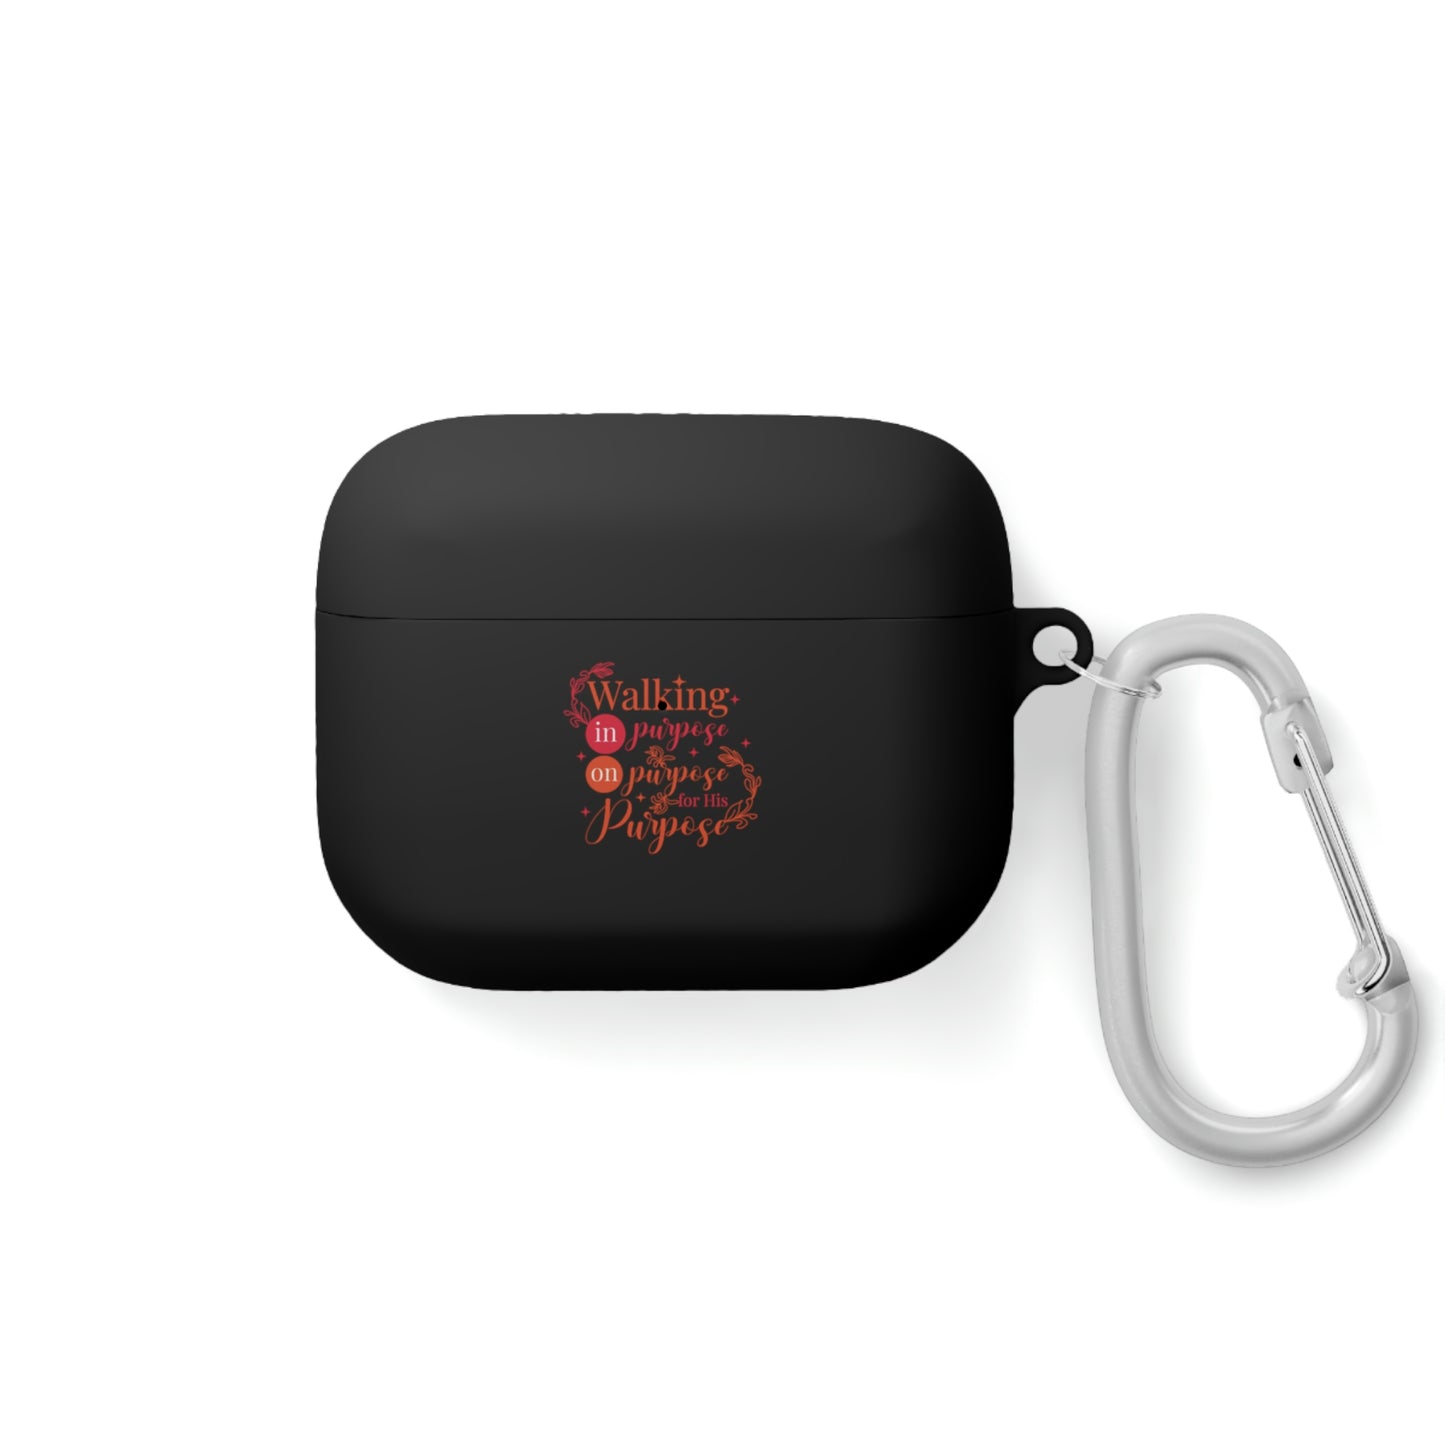 Walking In Purpose On Purpose For His Purpose AirPods / Airpods Pro Case cover